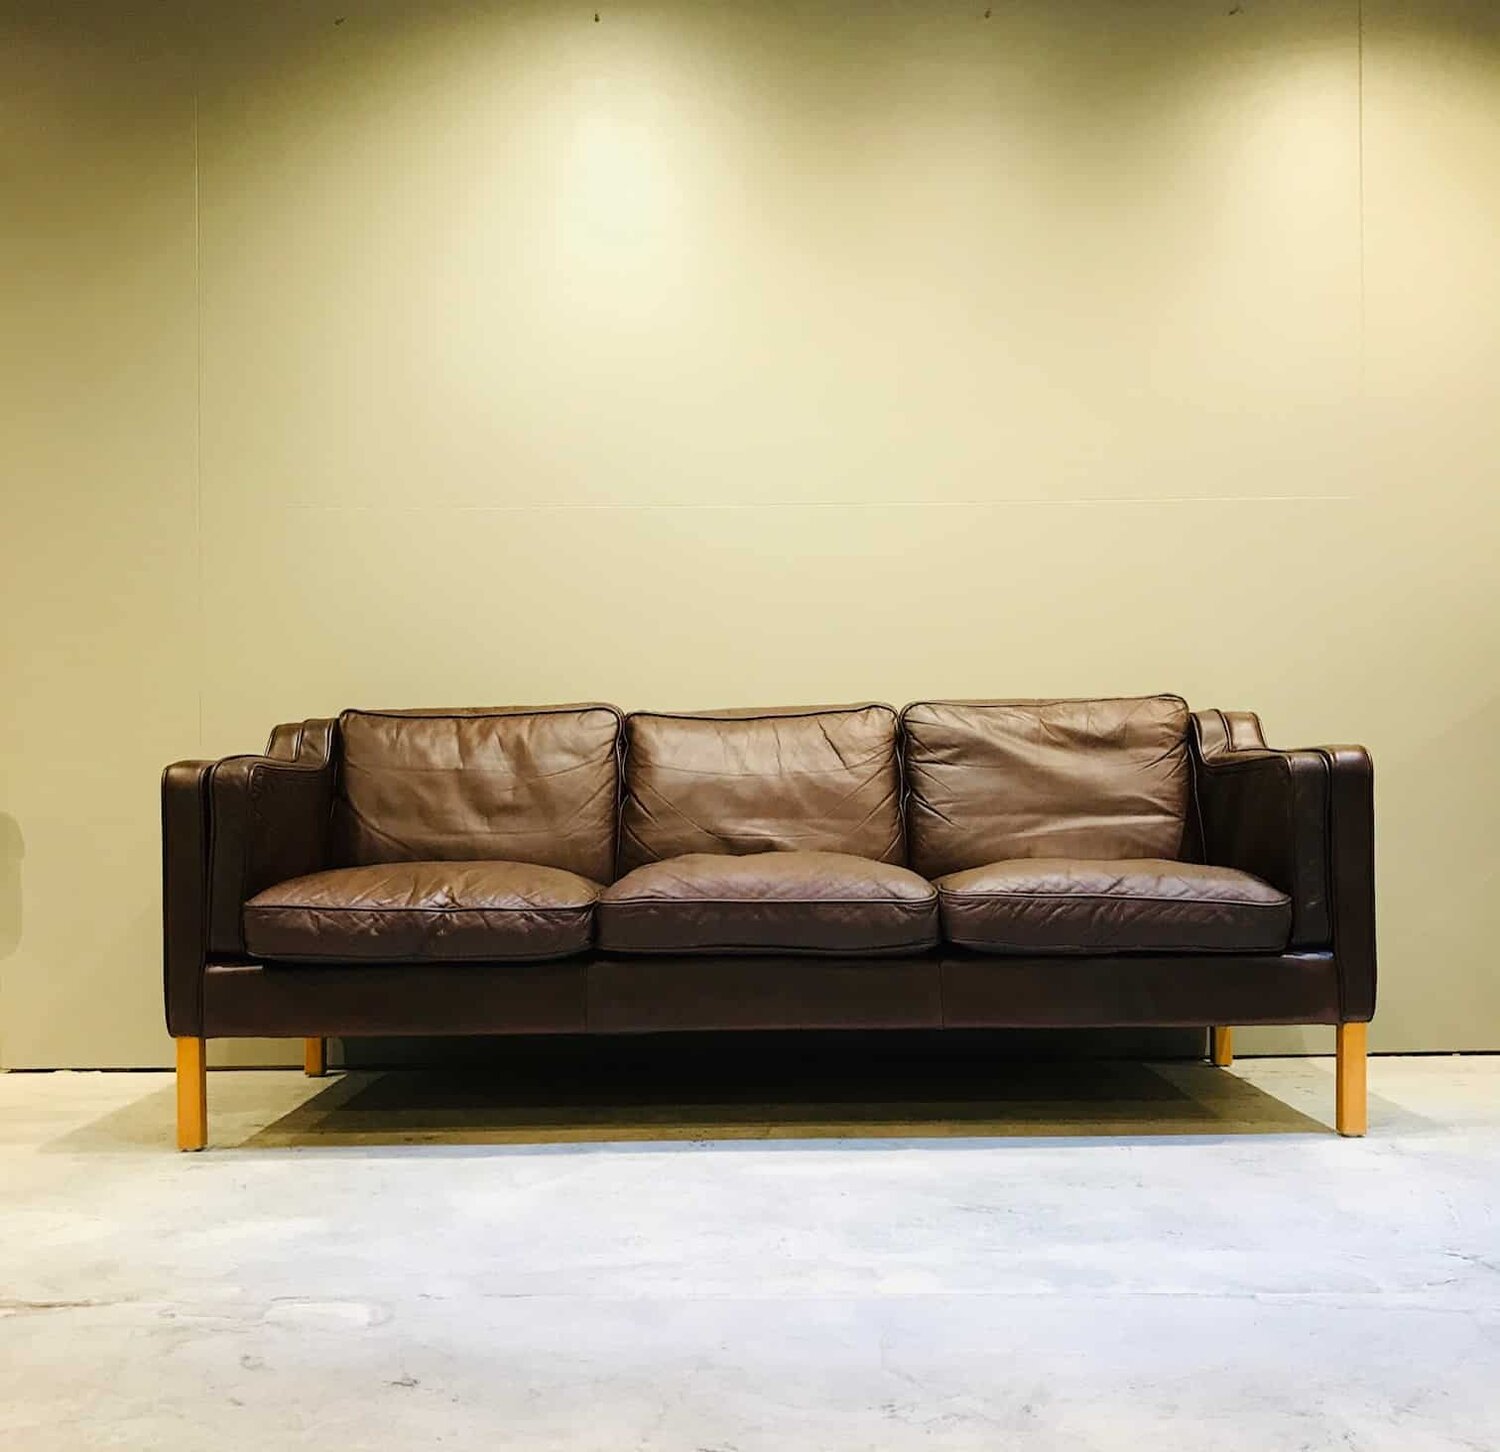 Mid Century Furniture Melbourne, Vintage Leather Couch Melbourne